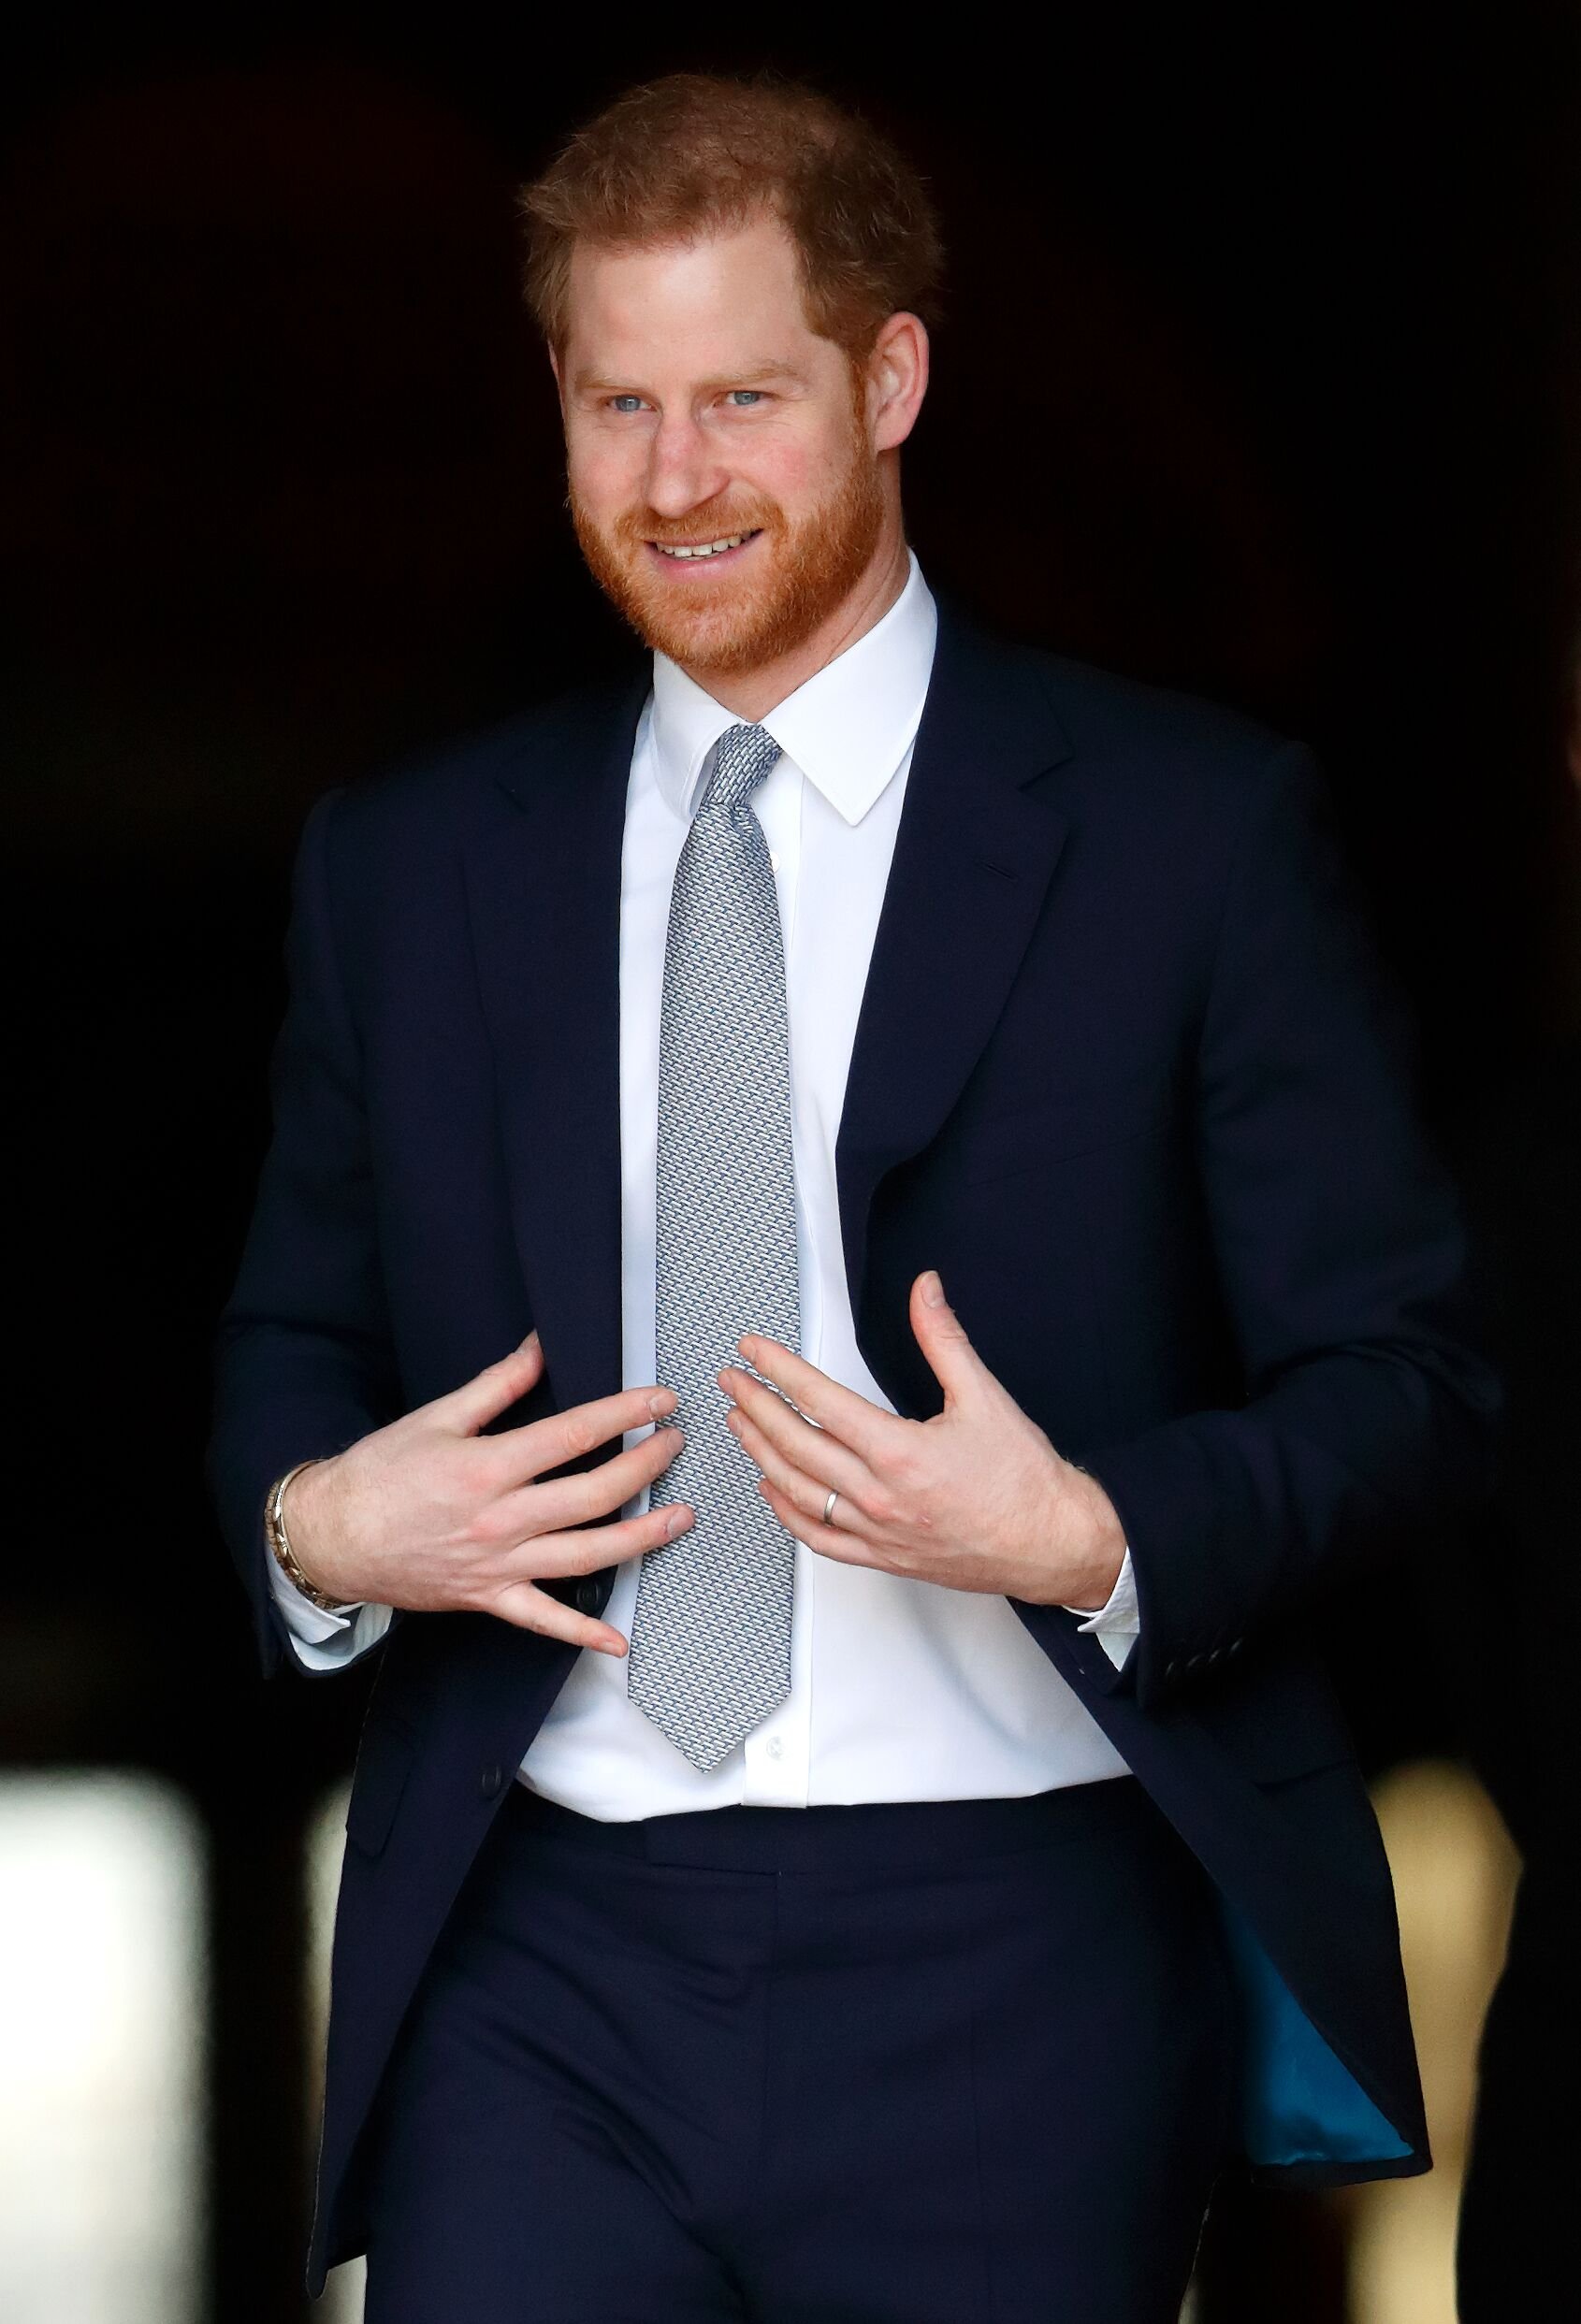 Prince Harry, Duke of Sussex hosts the Rugby League World Cup 2021 draws for the men's, women's and wheelchair tournaments. | Source: Getty Images